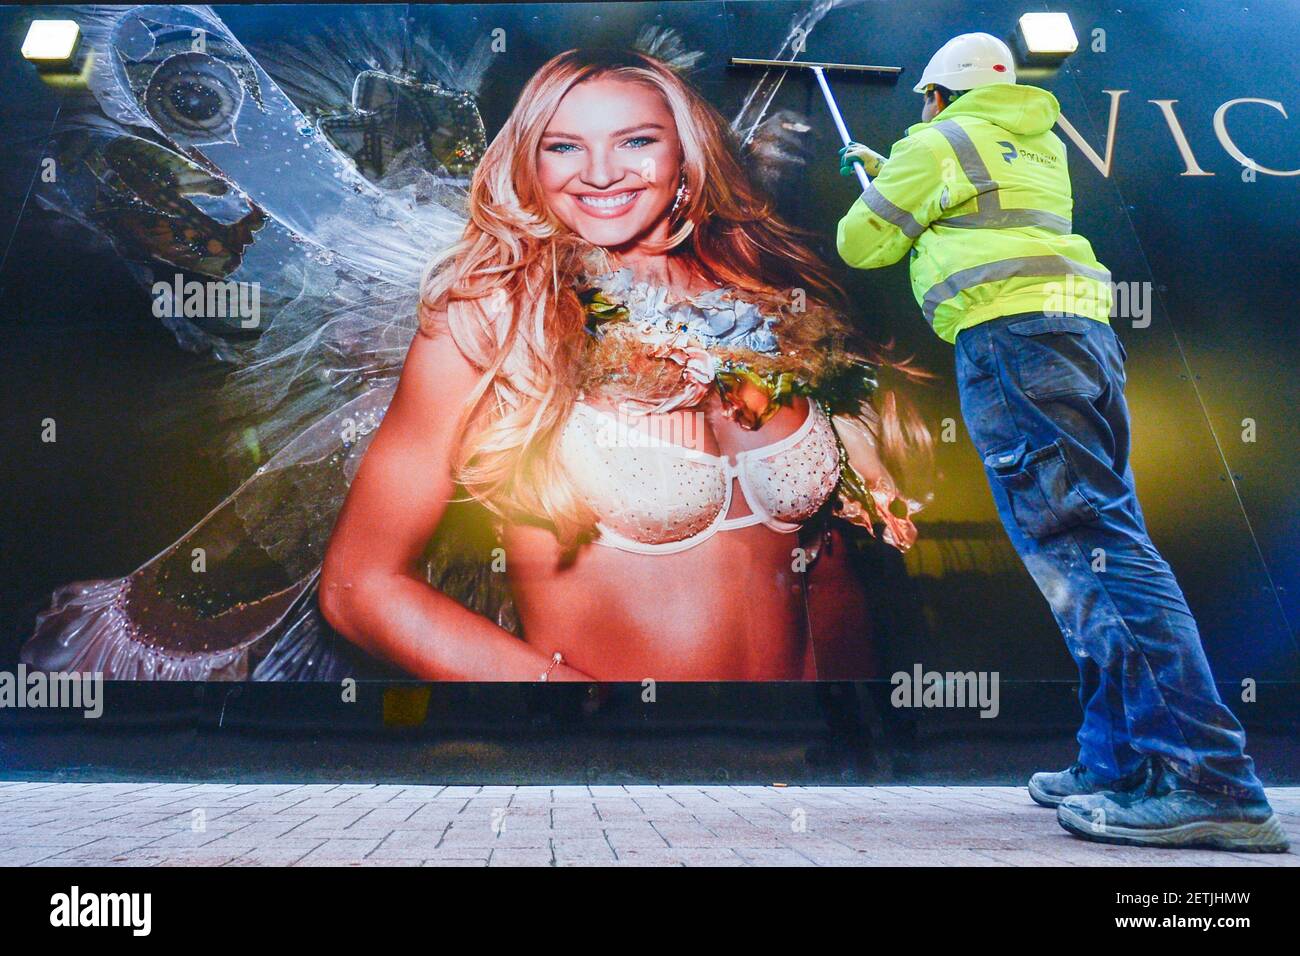 A man cleans Victoria Secret billboard announcing the opening of